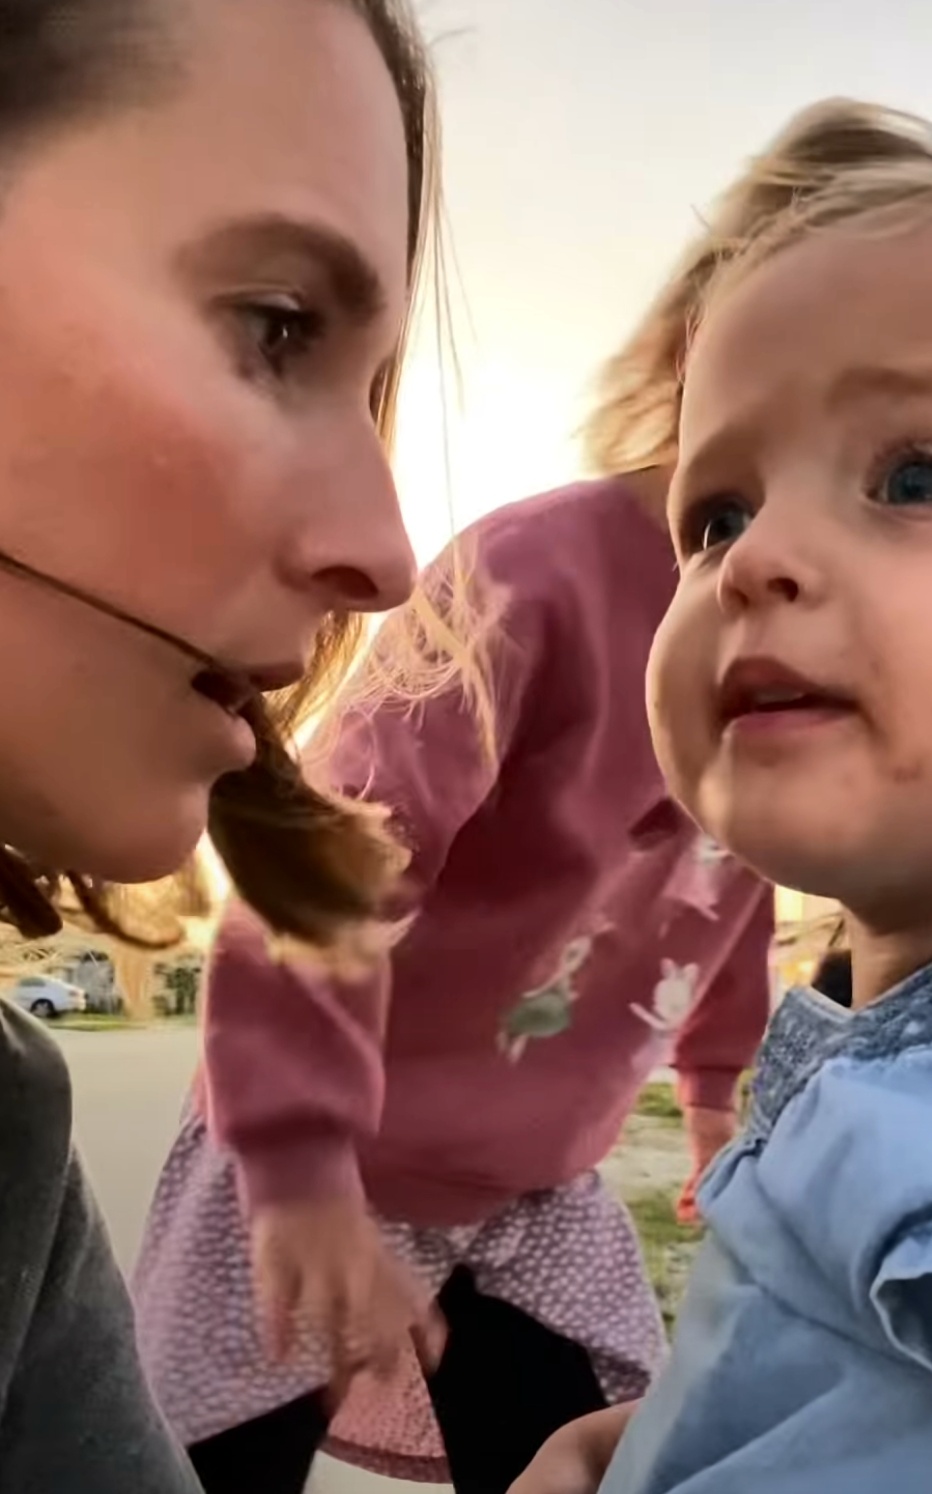 I Just A Baby' Viral Video Deleted; Account Disabled By Tiktok - The Teal  Mango